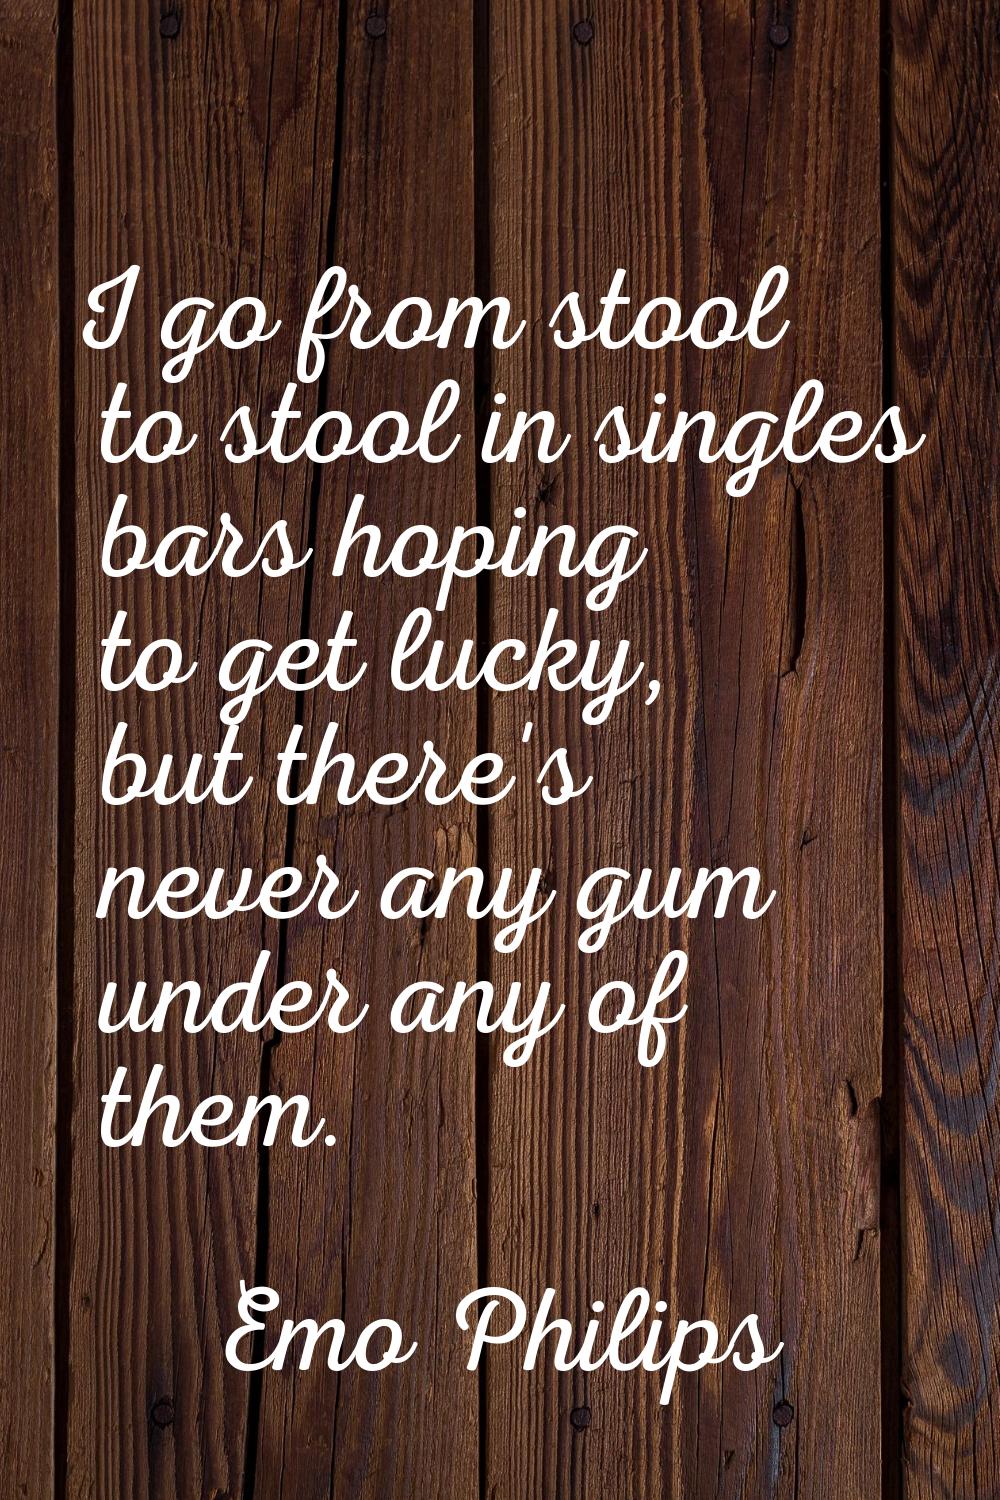 I go from stool to stool in singles bars hoping to get lucky, but there's never any gum under any o